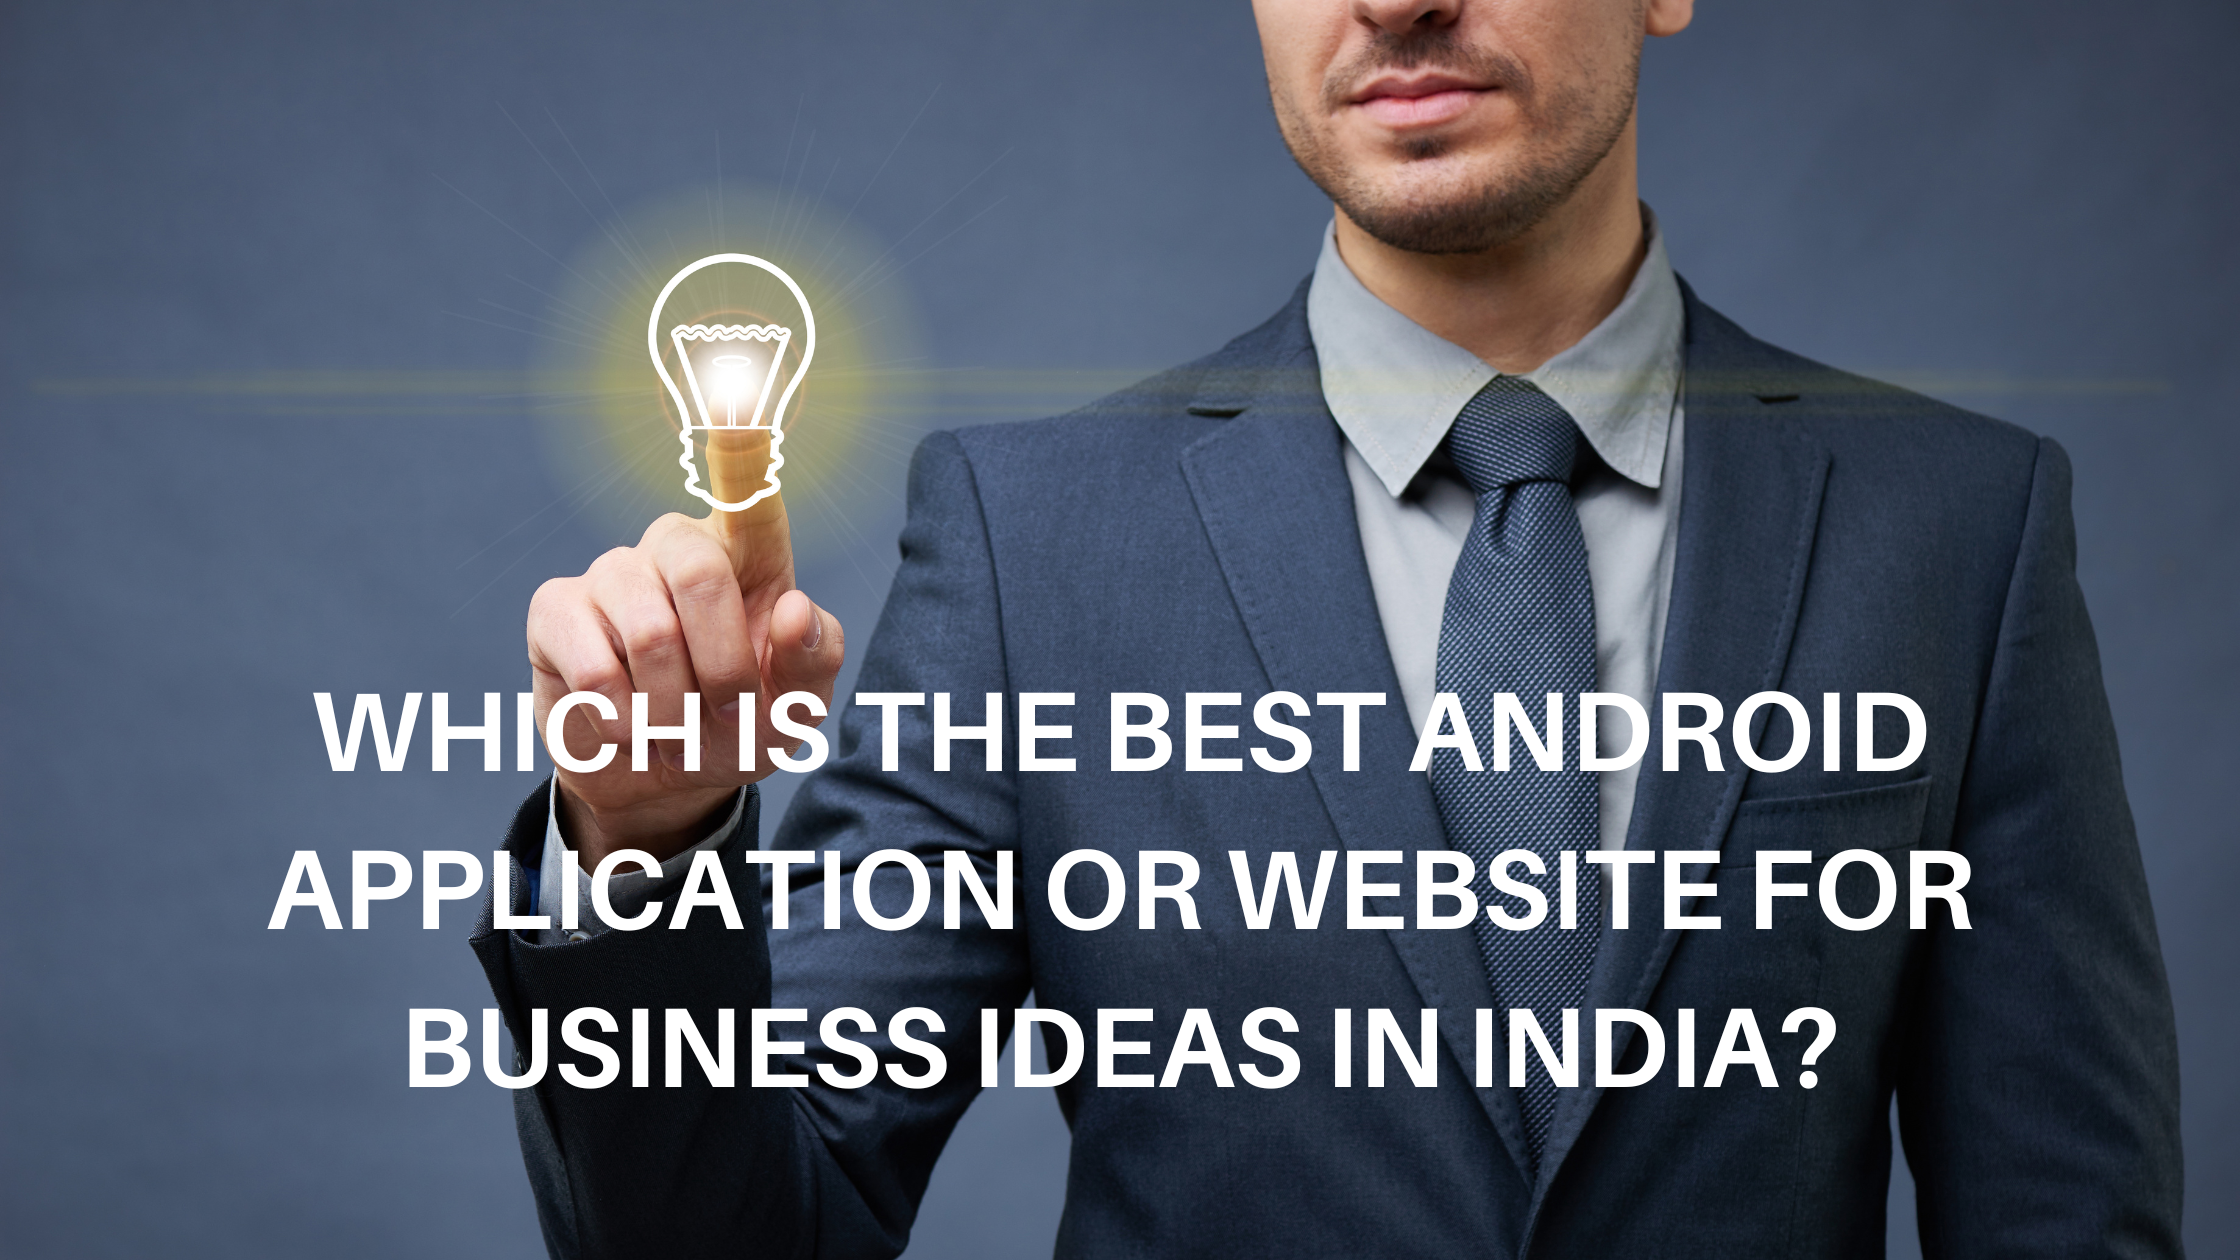 best Android applications or websites for business ideas in India